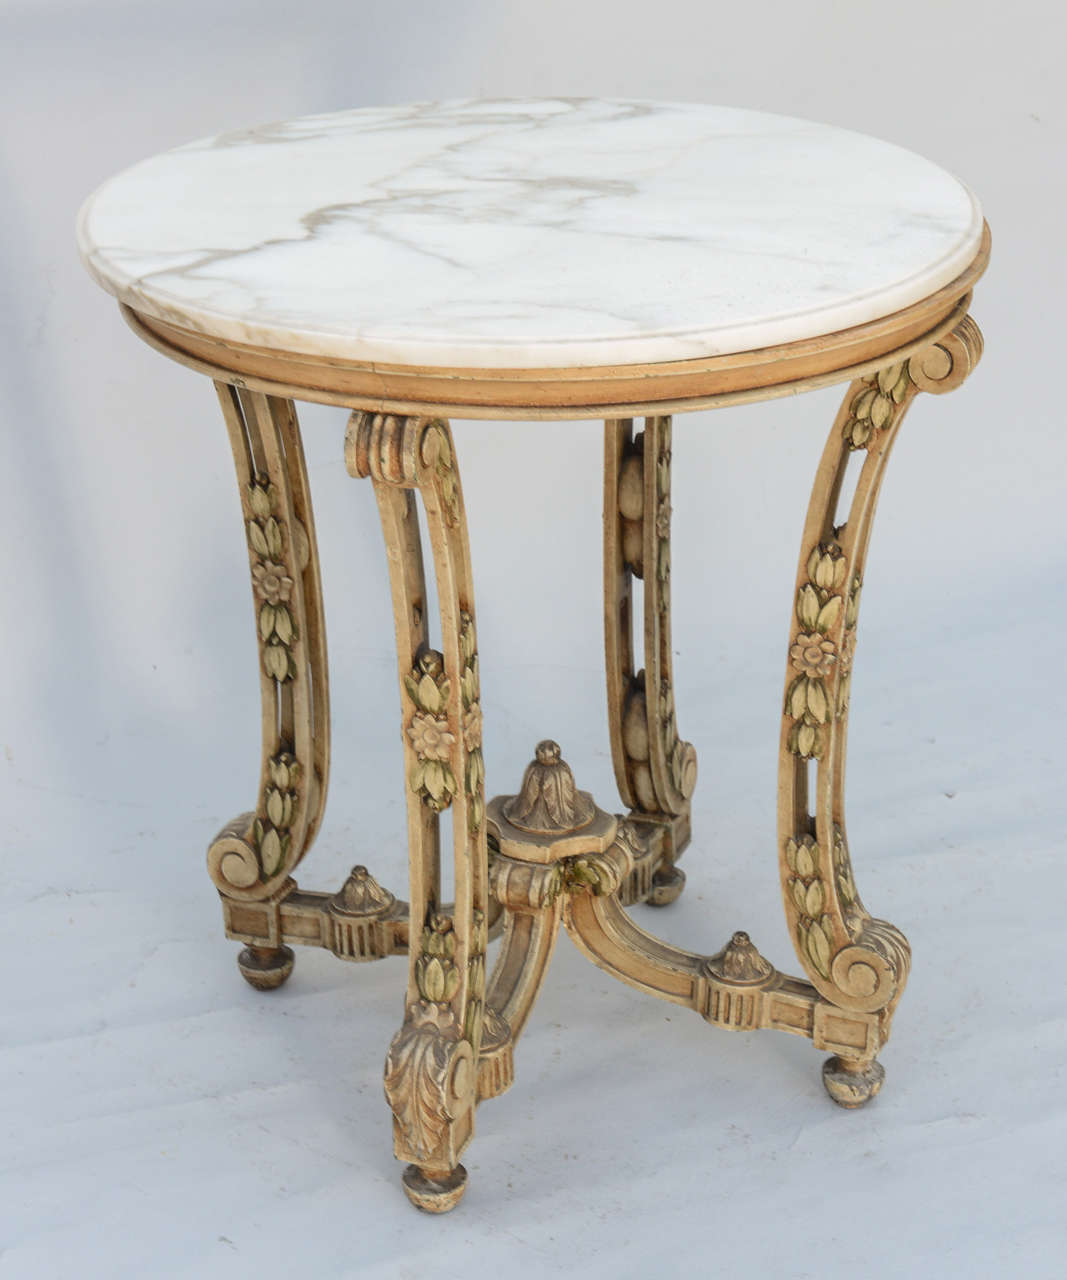 Round accent table, having white veined marble top, raised on molded apron and elaborately carved scrolling legs with rosettes, leafy and acanthus details; connected by stretcher centered by acanthus leaf crown.